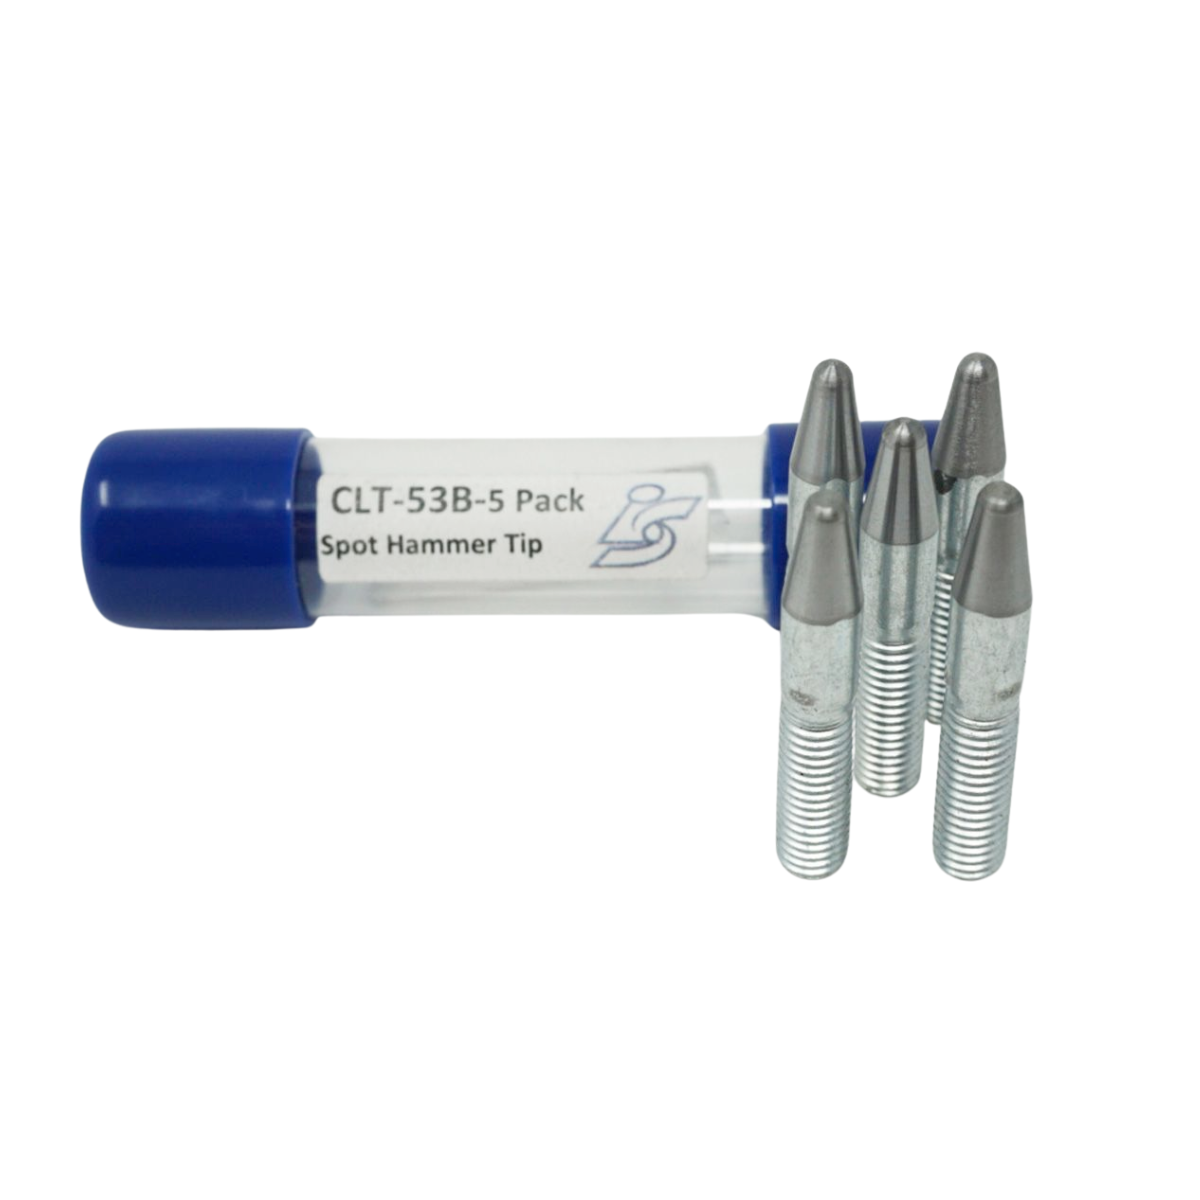 Contact Tip Spot Hammer Package of 5